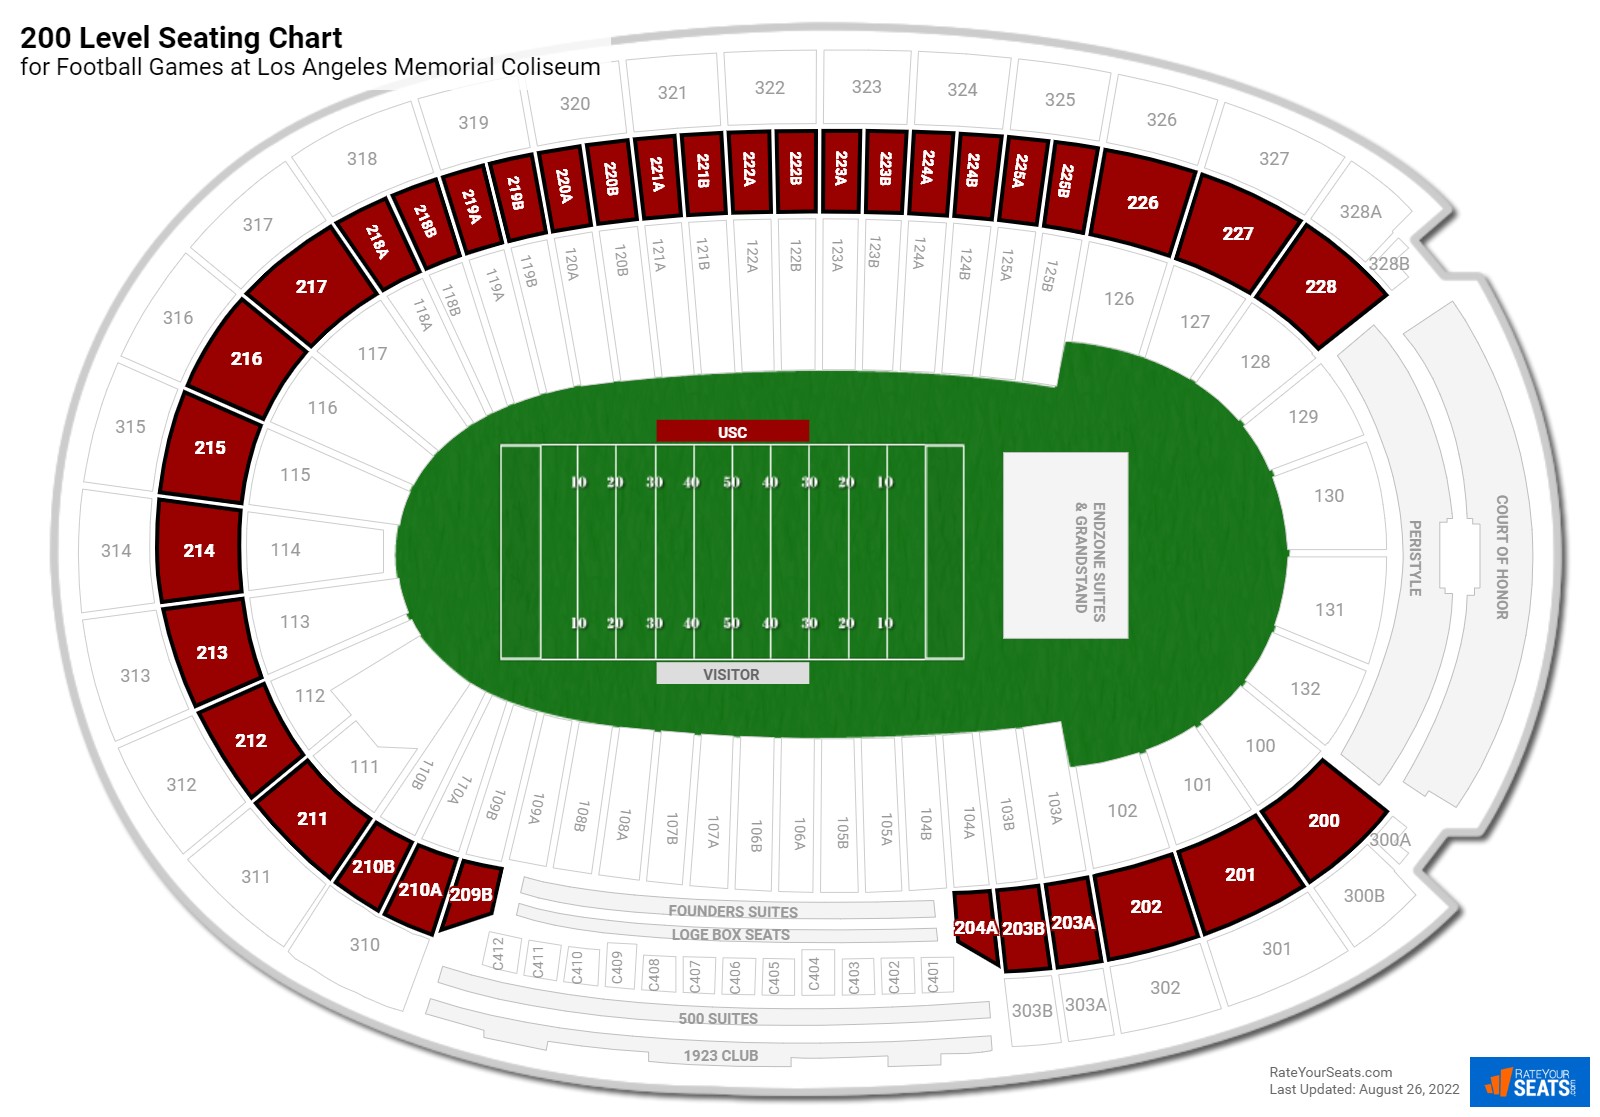 Football 200 Level Seating Chart at Los Angeles Memorial Coliseum